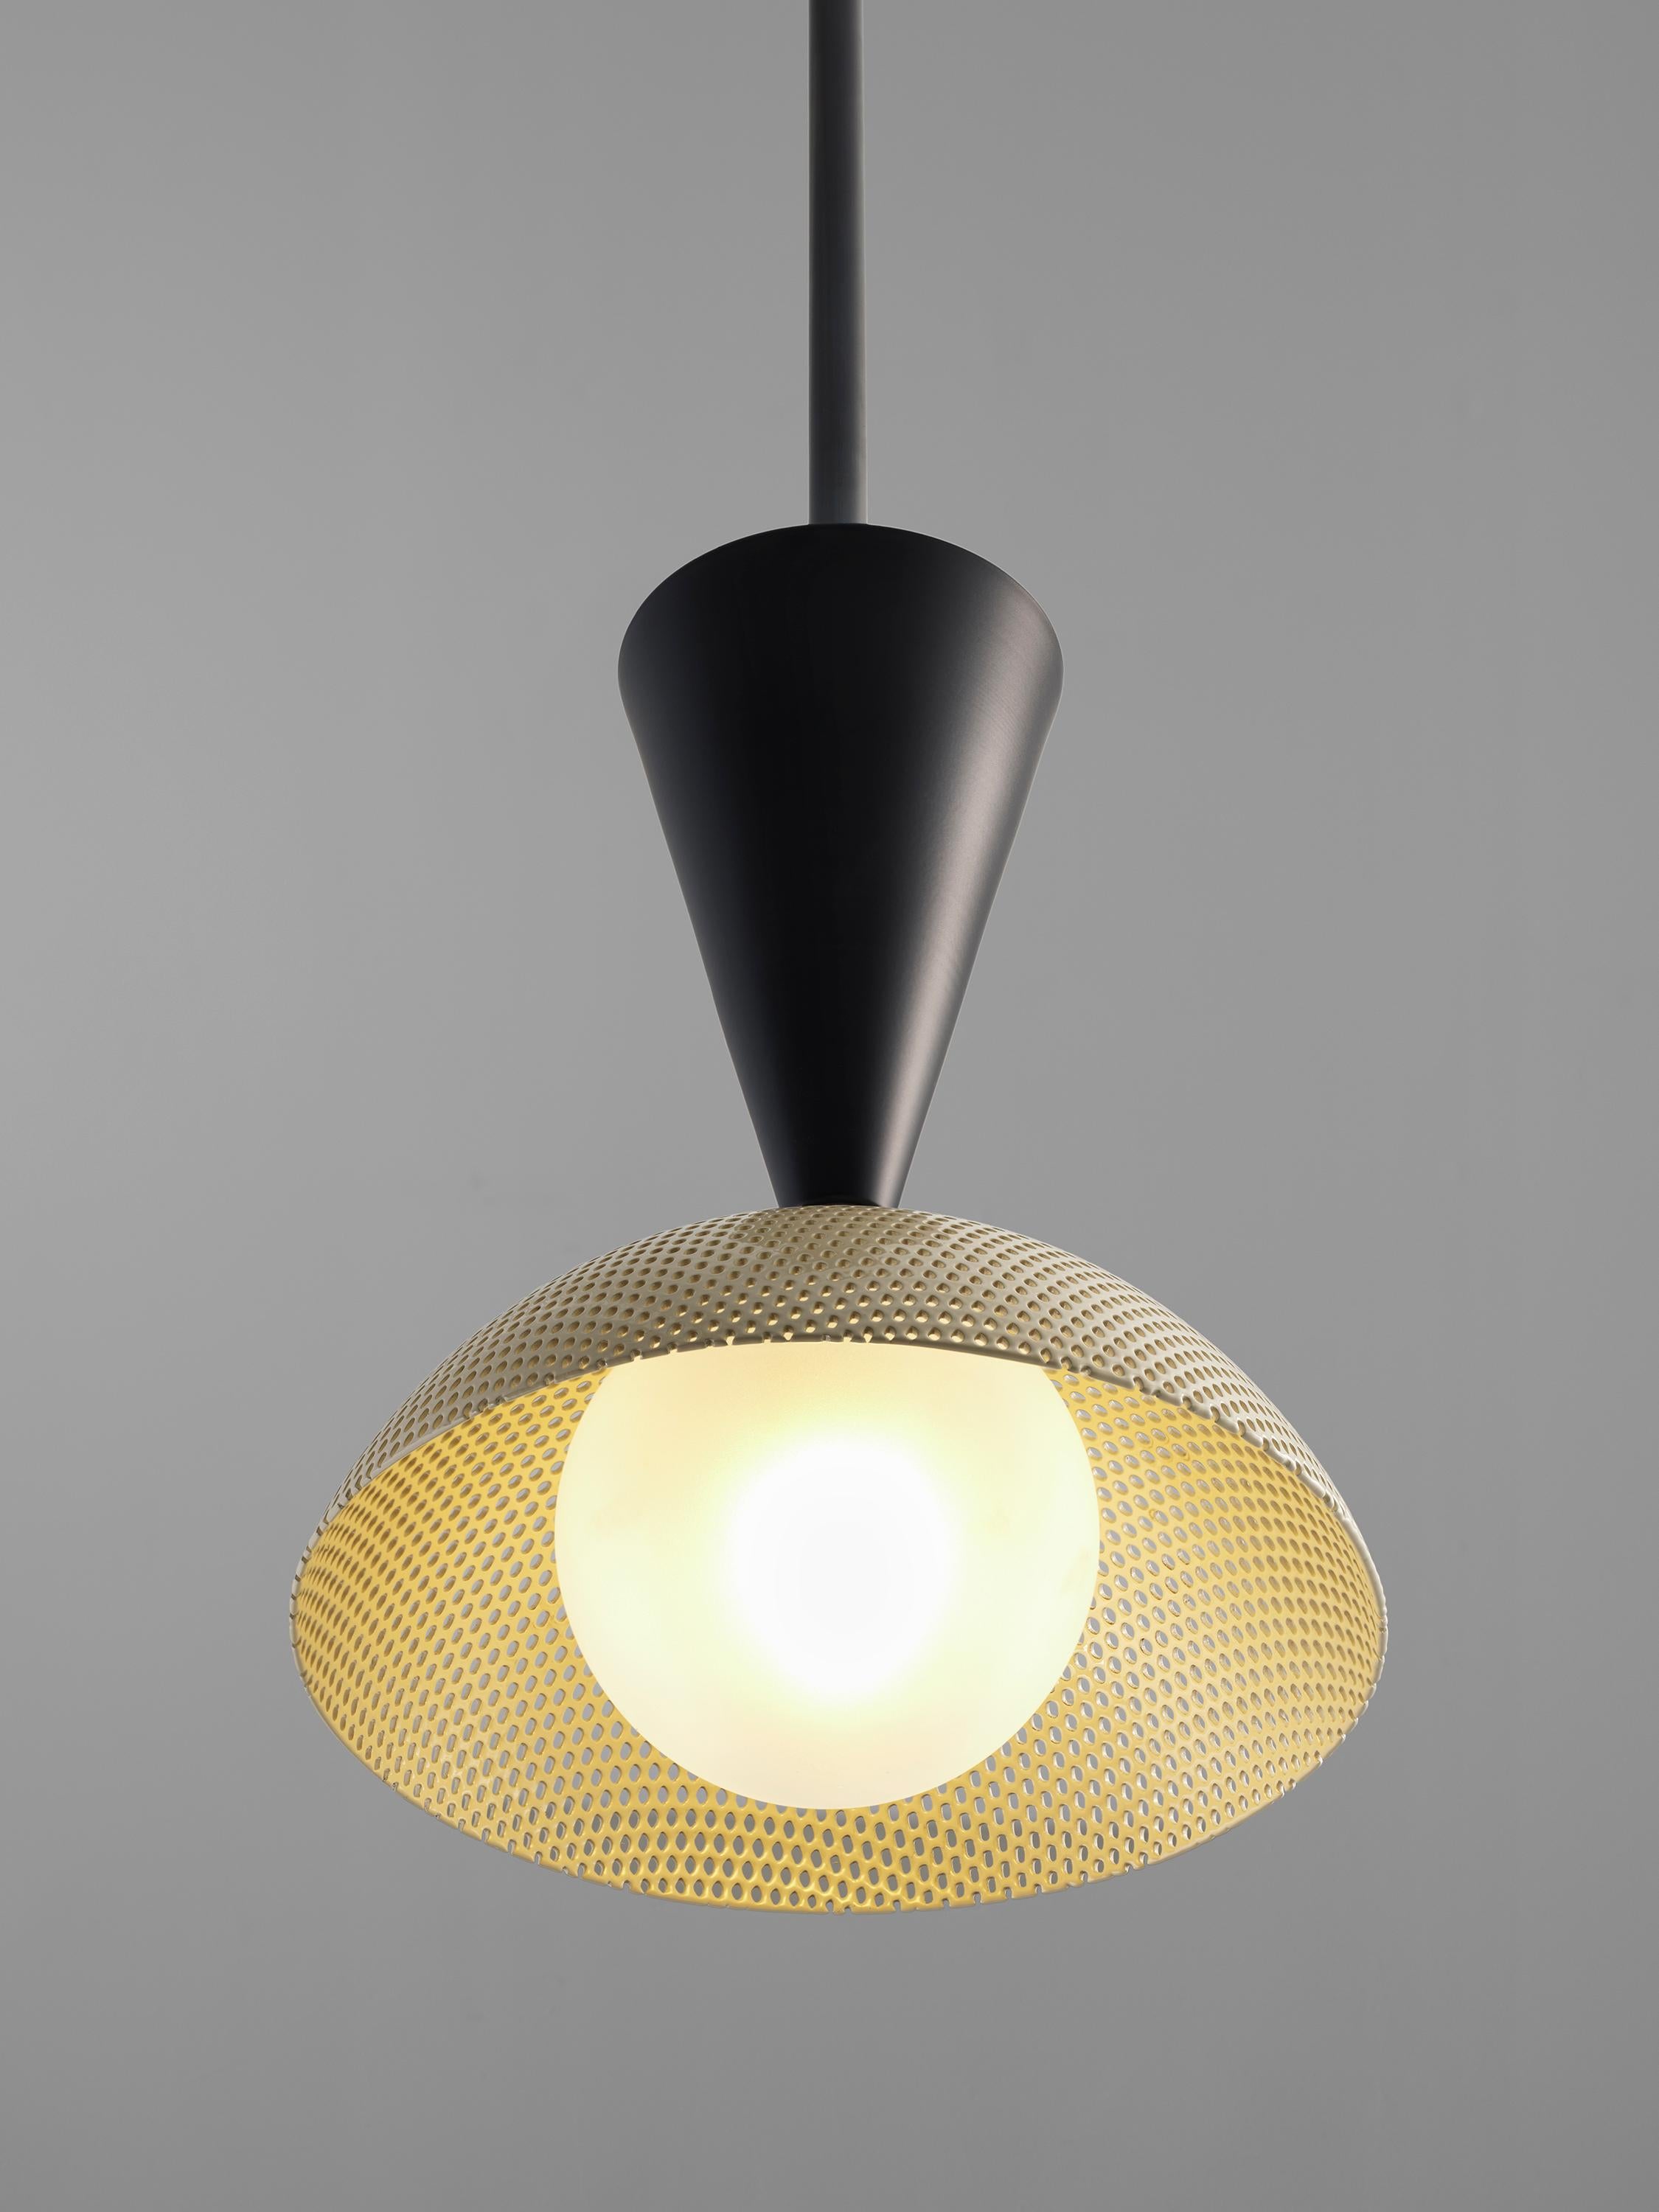 MOLTO Pendant Light in Oil-Rubbed Bronze and Enameled Mesh by Blueprint Lighting In New Condition For Sale In New York, NY